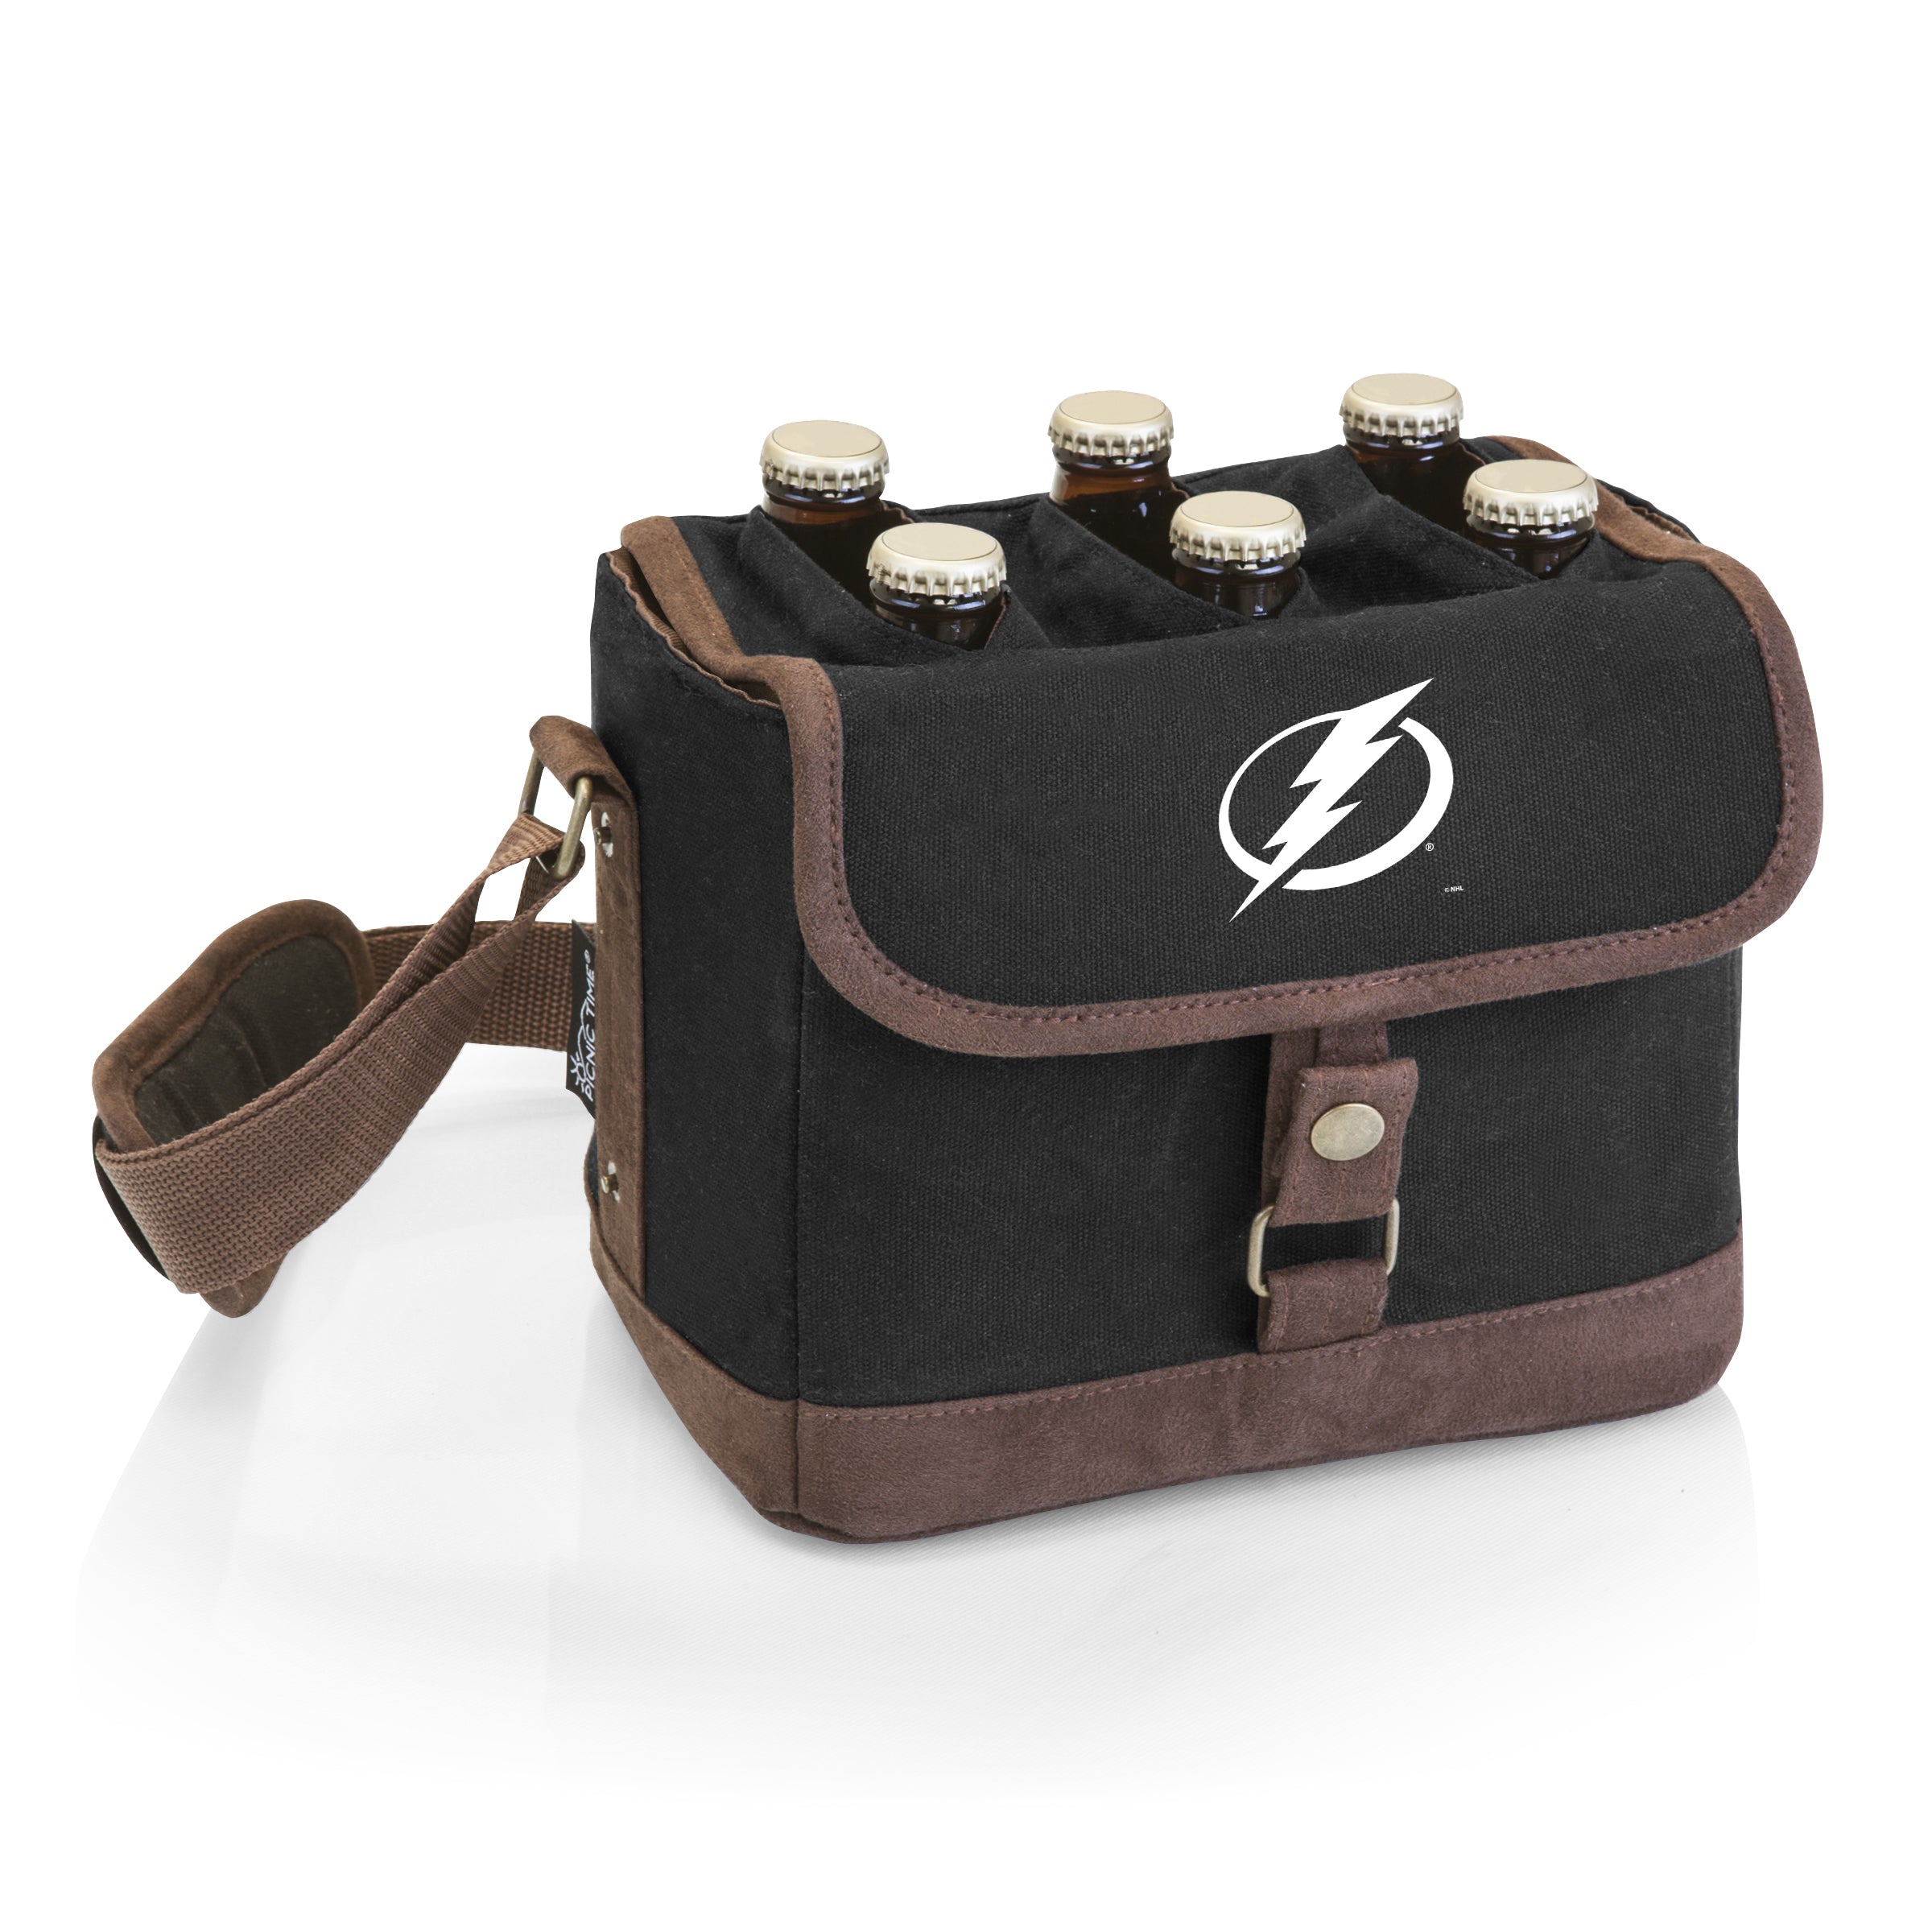 Tampa Bay Lightning - Beer Caddy Cooler Tote with Opener